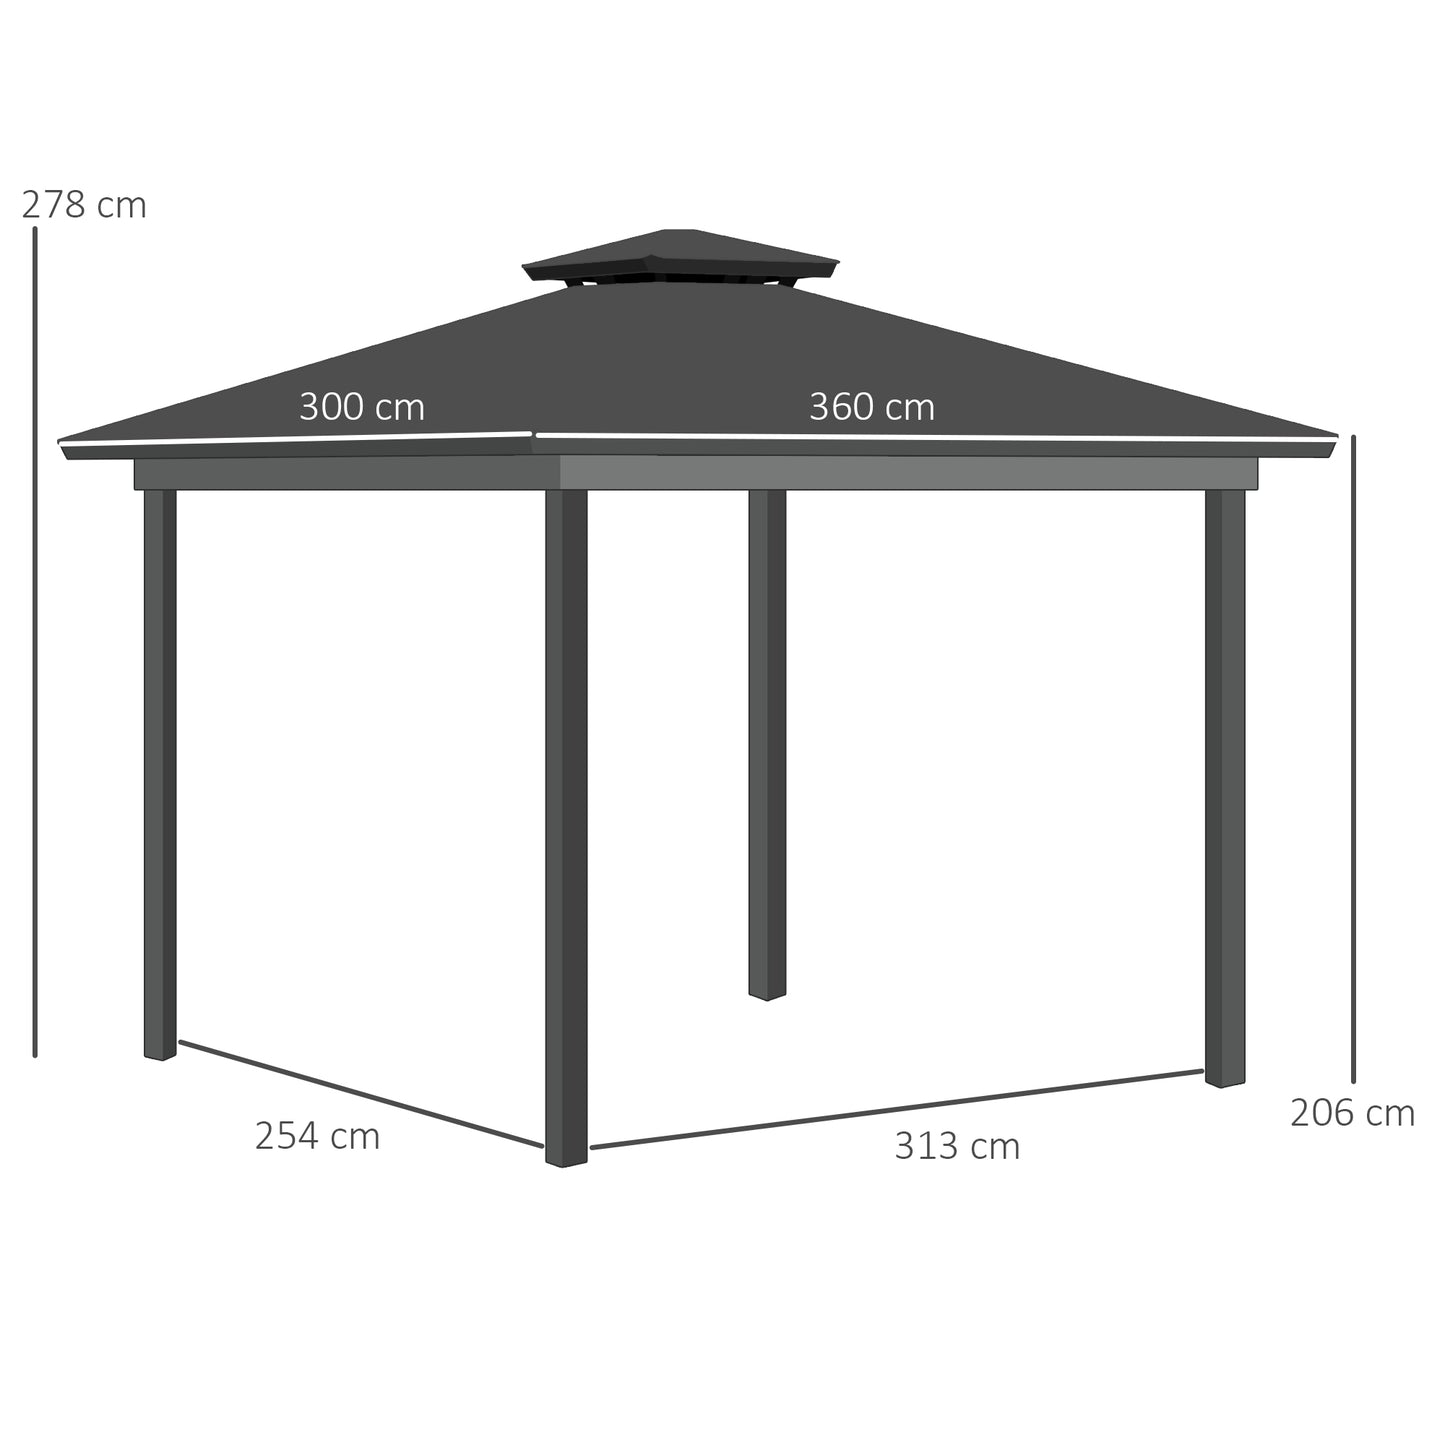 Outsunny 3.6 x 3 (m) Outdoor Polycarbonate Gazebo, Double Roof Hard Top Gazebo with Nettings & Curtains for Garden, Lawn, Patio